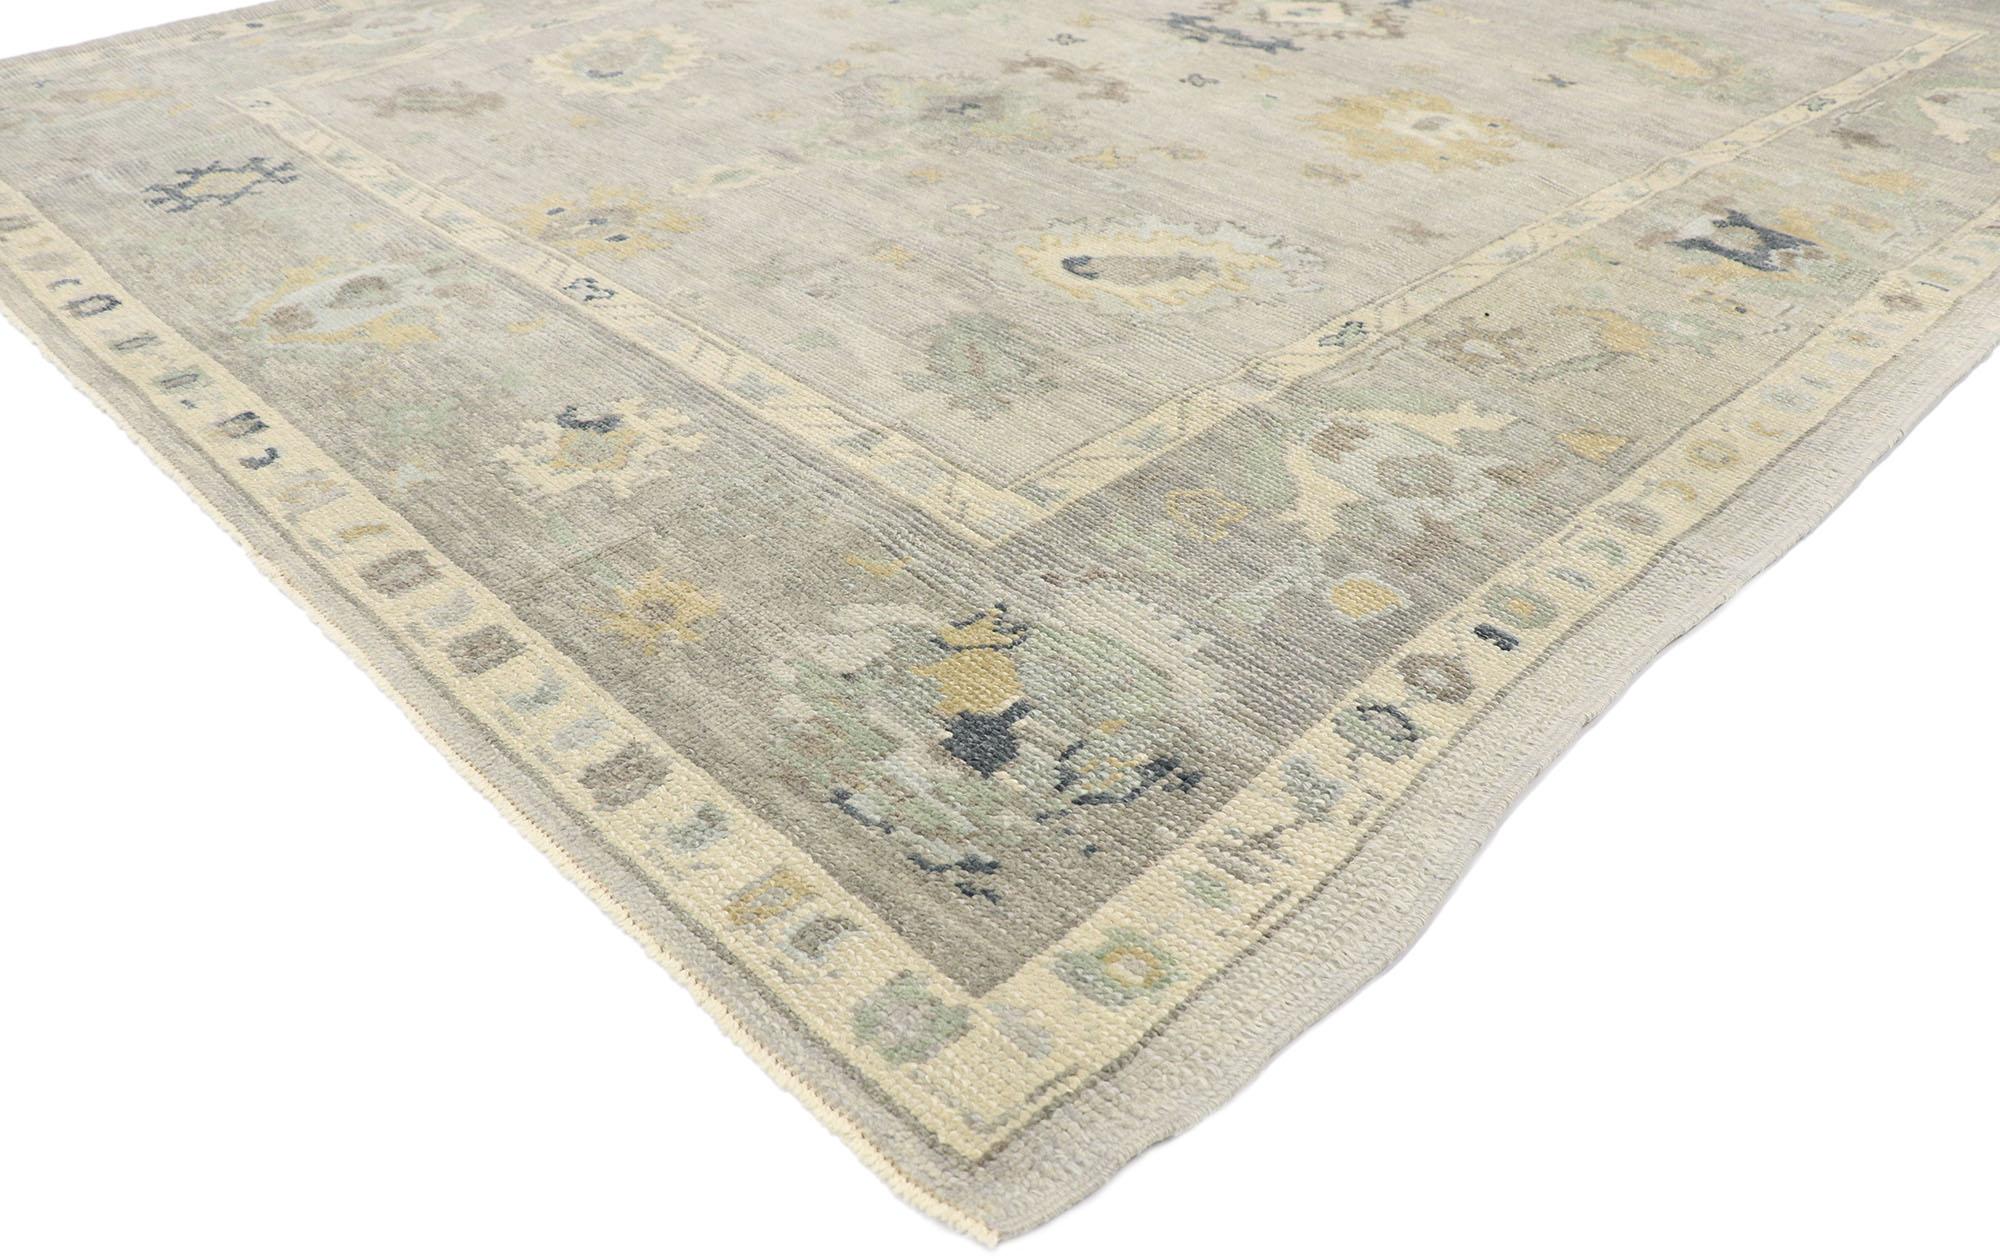 53502, new contemporary gray Turkish Oushak rug with Calming Coastal style. Blending elements from the modern world with a calming coastal color palette, this hand knotted wool contemporary Turkish Oushak rug is poised to impress. The geometric